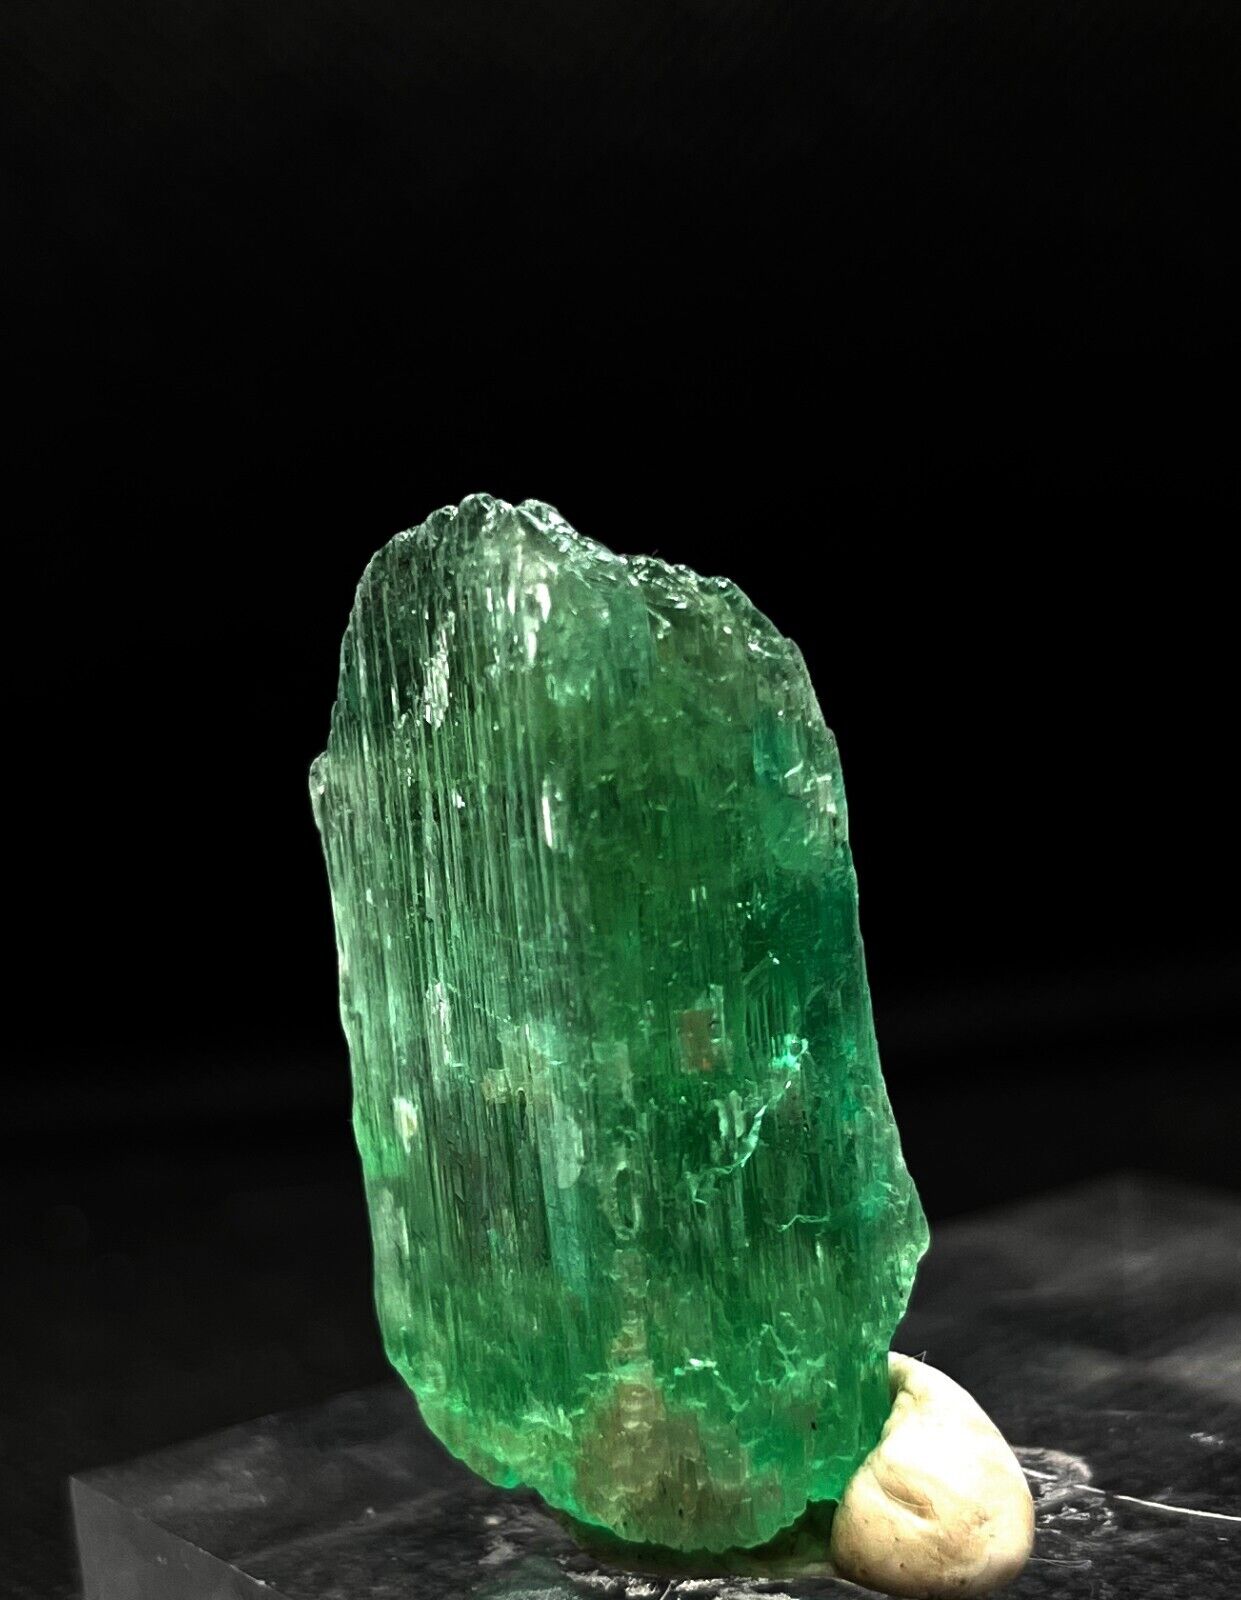 100 carats of Lush Green Kunzite crystal from Kunar, Afghanistan